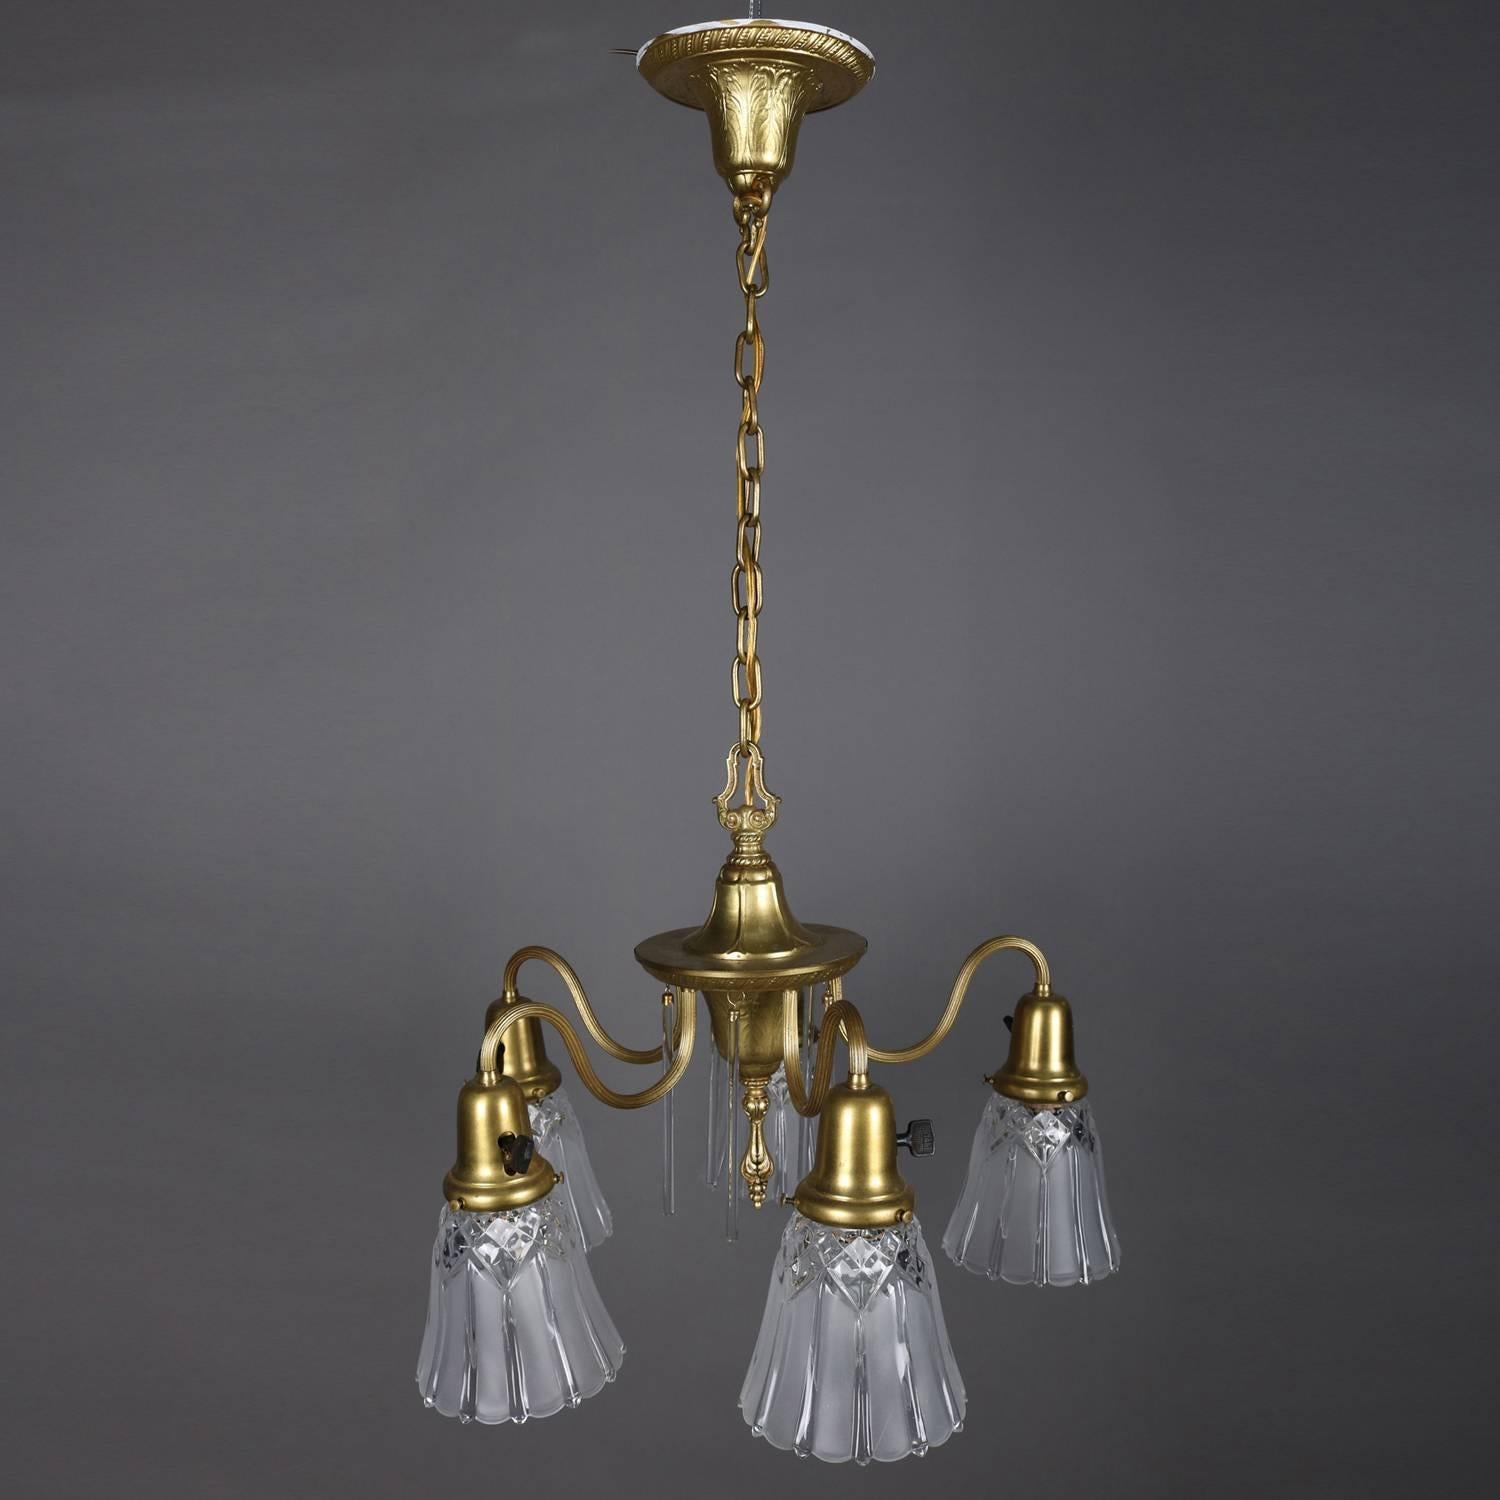 Metal Neoclassical Style Five-Light Gilt & Crystal Chandelier by Williamson circa 1940